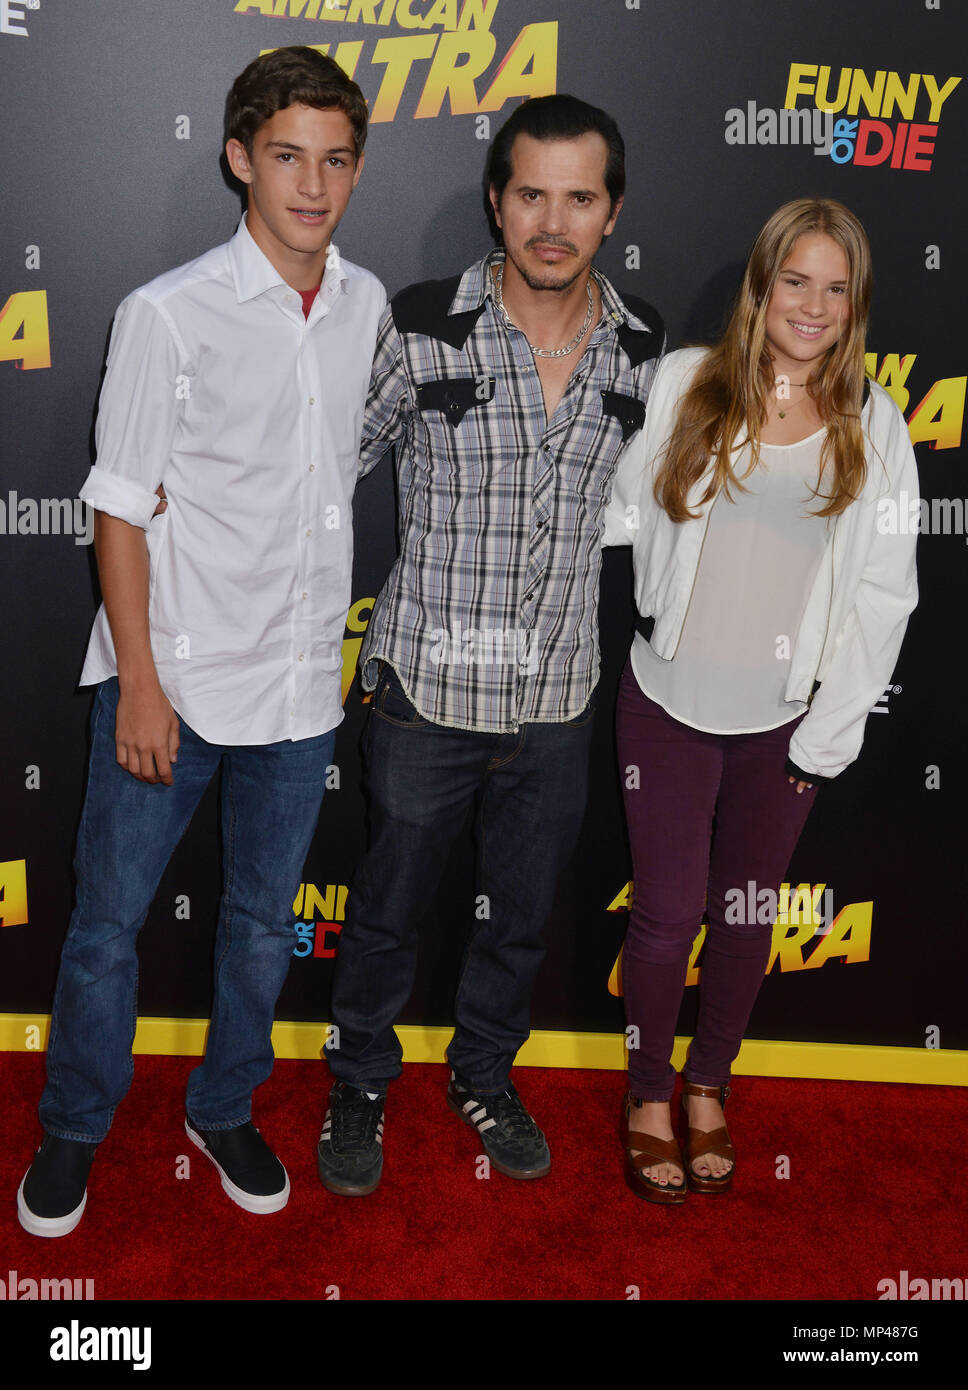 John Leguizamo, Kids Ryder, Allegra 009 at the American Ultra Premiere at the Ace Hotel in Downtown Los Angeles. August 18, 2015.John Leguizamo, Kids Ryder, Allegra 009 ------------- Red Carpet Event, Vertical, USA, Film Industry, Celebrities,  Photography, Bestof, Arts Culture and Entertainment, Topix Celebrities fashion /  Vertical, Best of, Event in Hollywood Life - California,  Red Carpet and backstage, USA, Film Industry, Celebrities,  movie celebrities, TV celebrities, Music celebrities, Photography, Bestof, Arts Culture and Entertainment,  Topix, vertical,  family from from the year , 2 Stock Photo